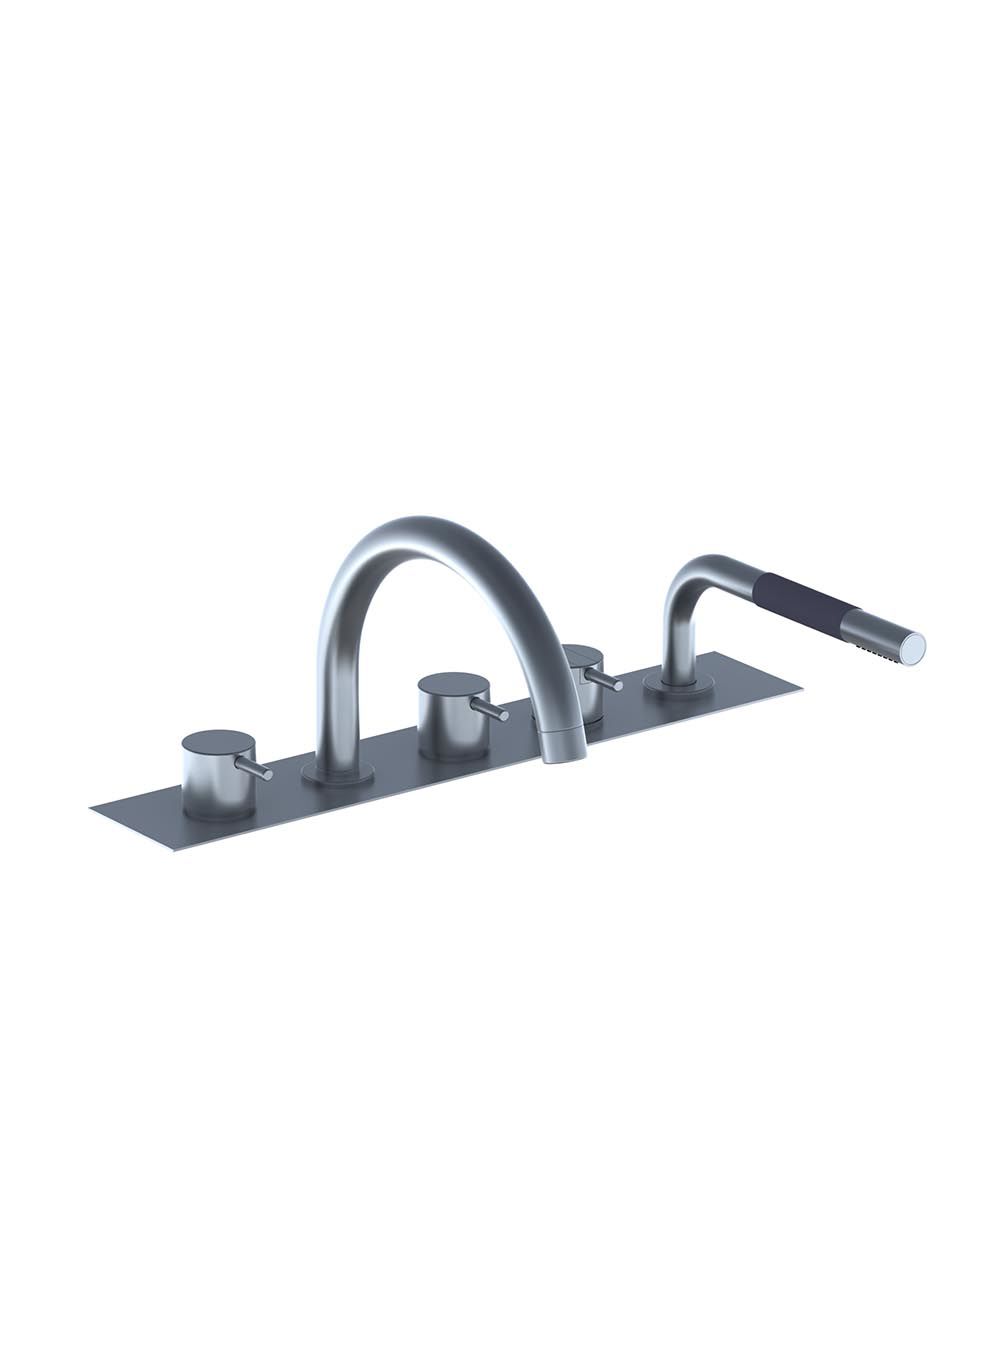 BK13: Two-handle mixer with swivel spout for bath filling and mixer with hand shower. Complete with mounti